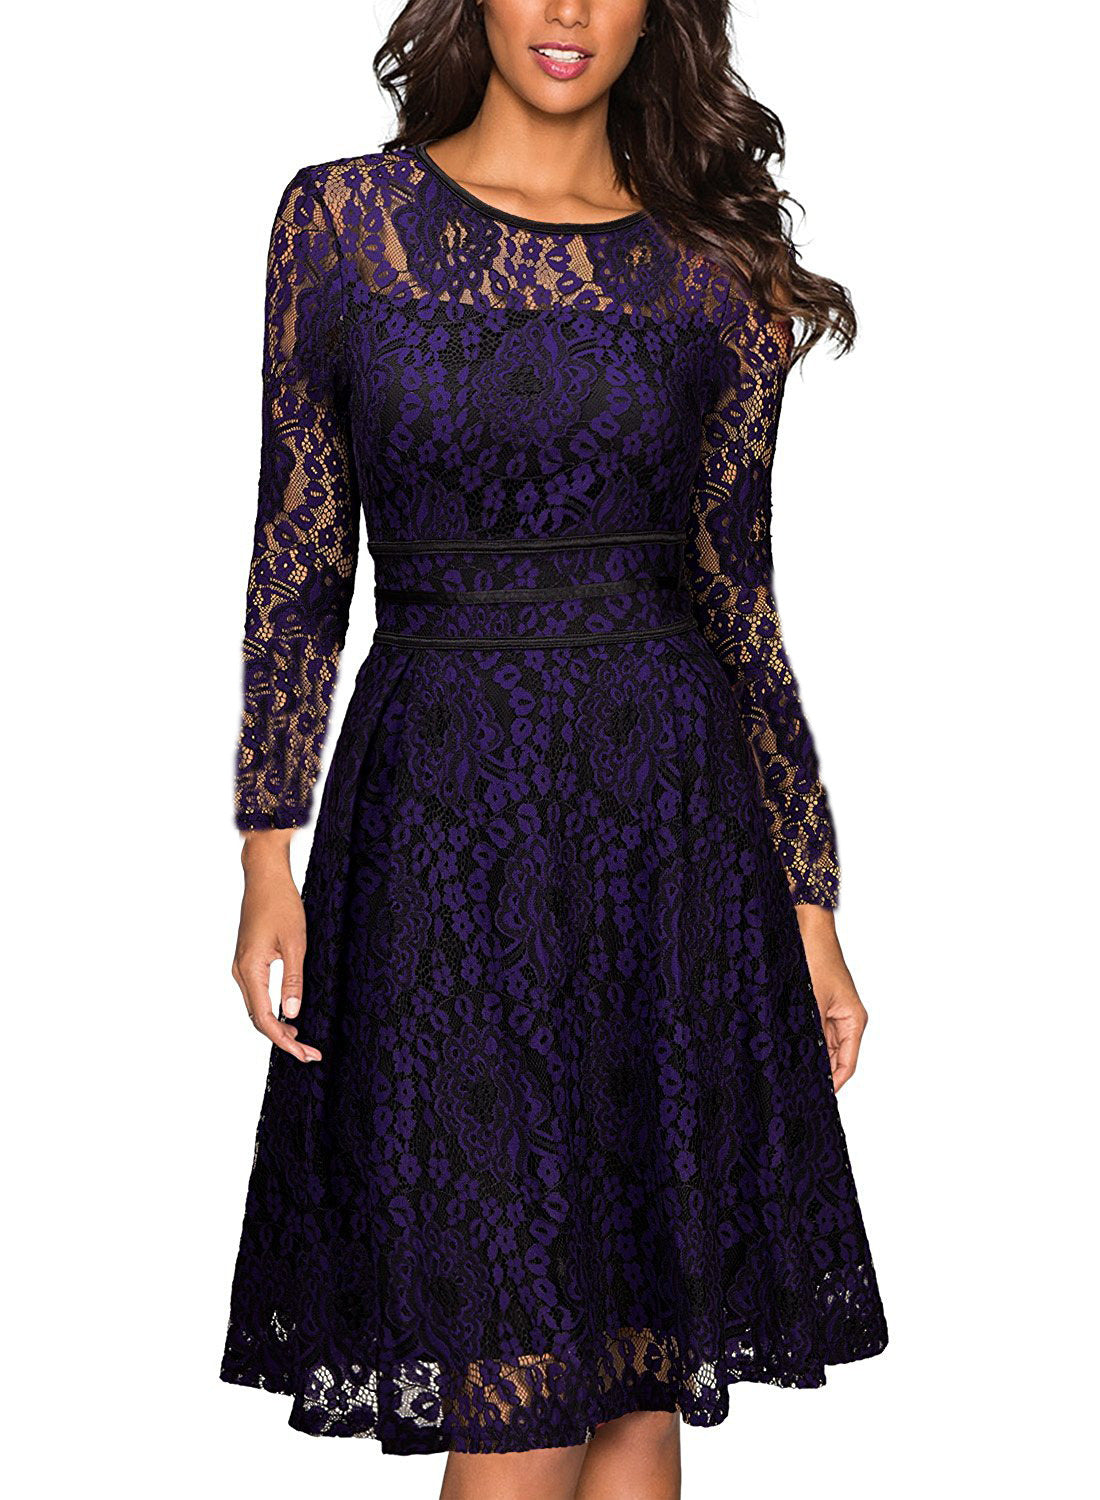 Solid Color Long-sleeved Lace Knee-length Party Dress